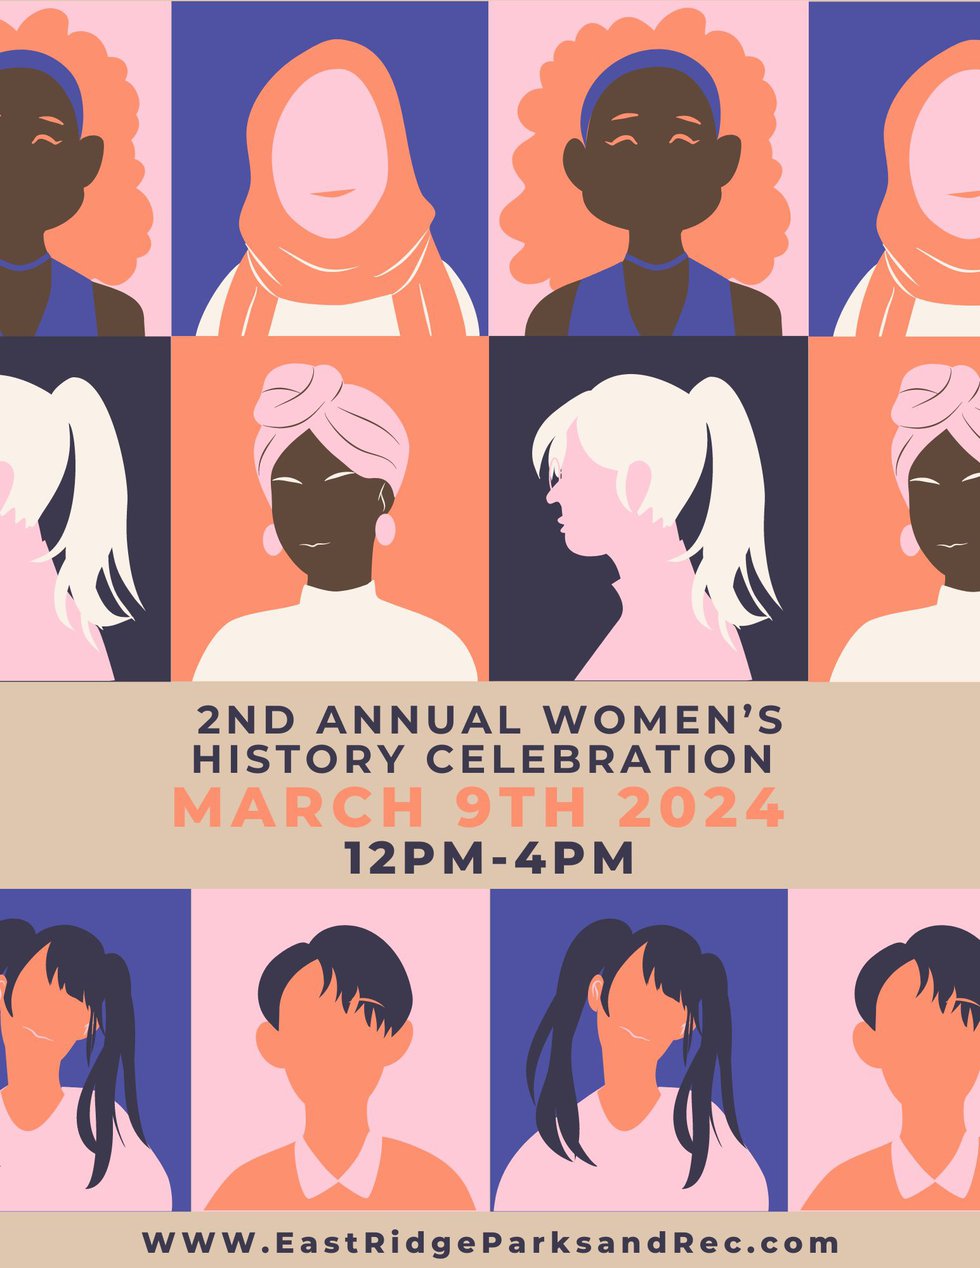 East Ridge To Host National Women’s History Month Celebration This